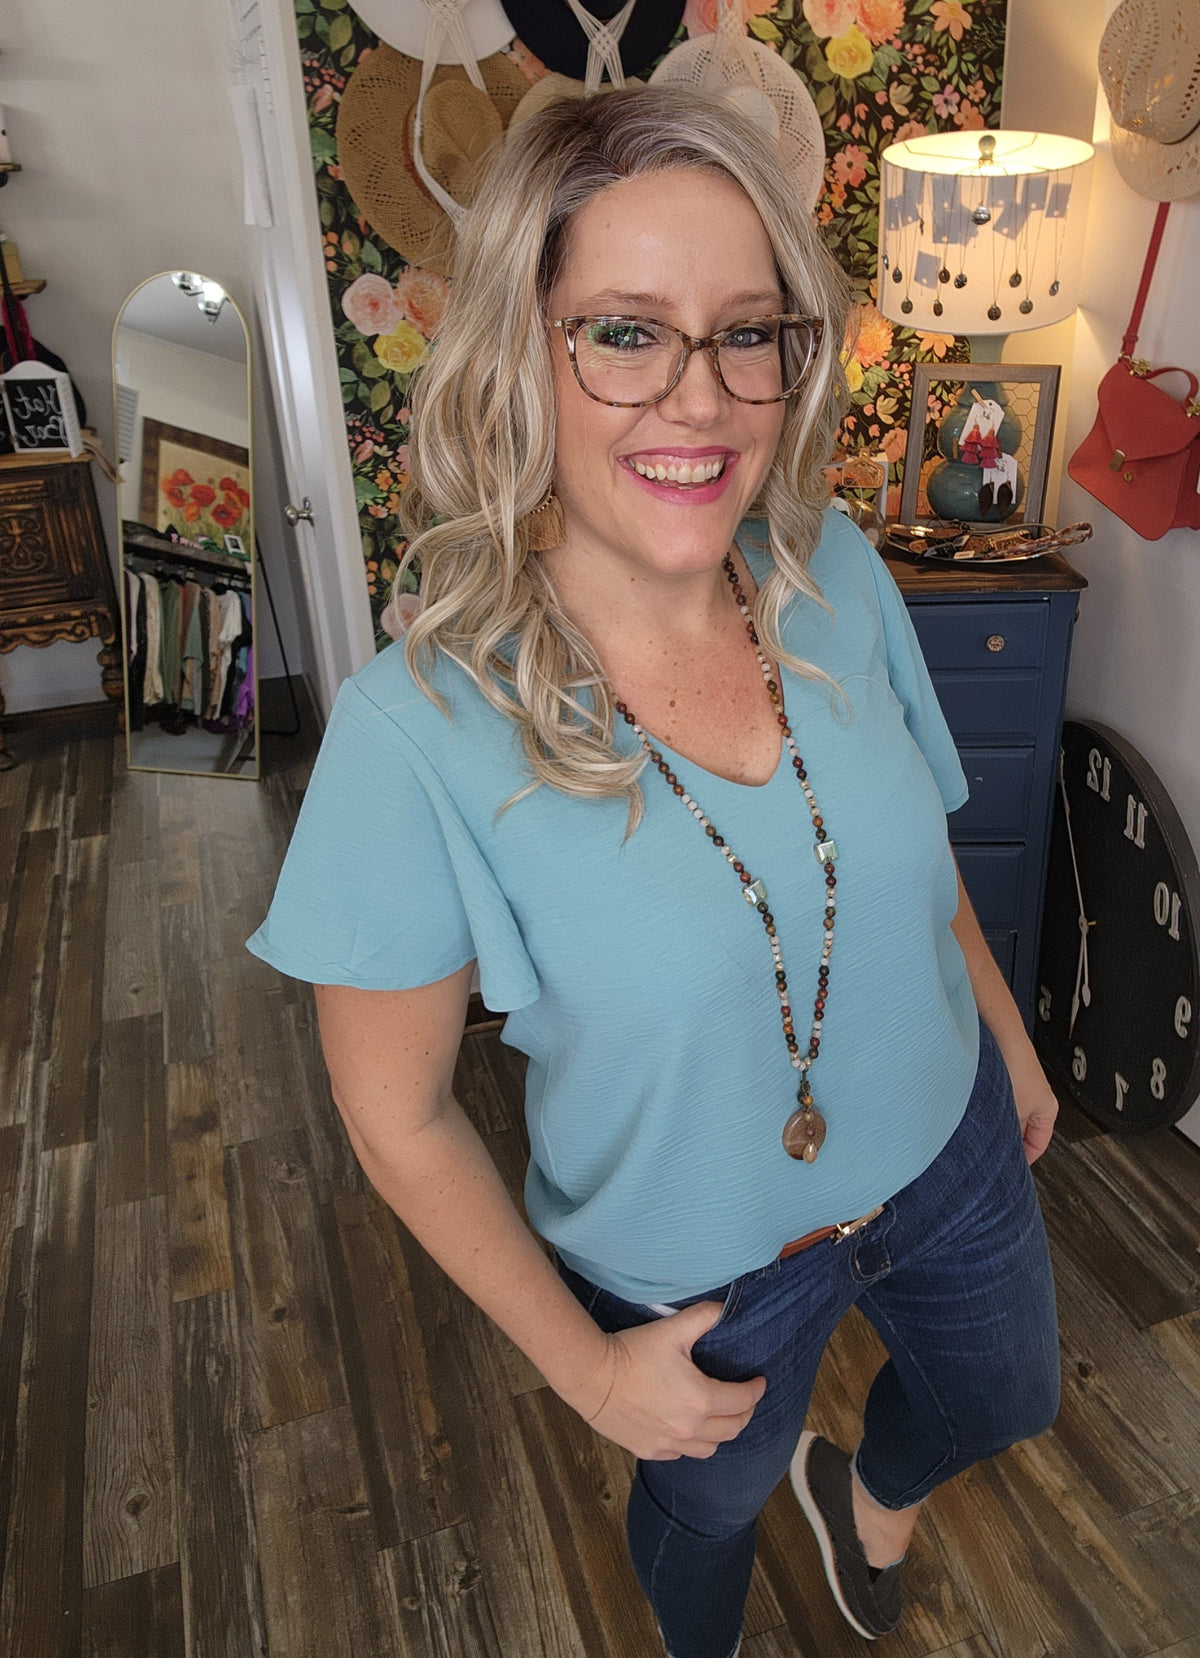 Flutter Sleeve Blouse in Teal S - 3XL